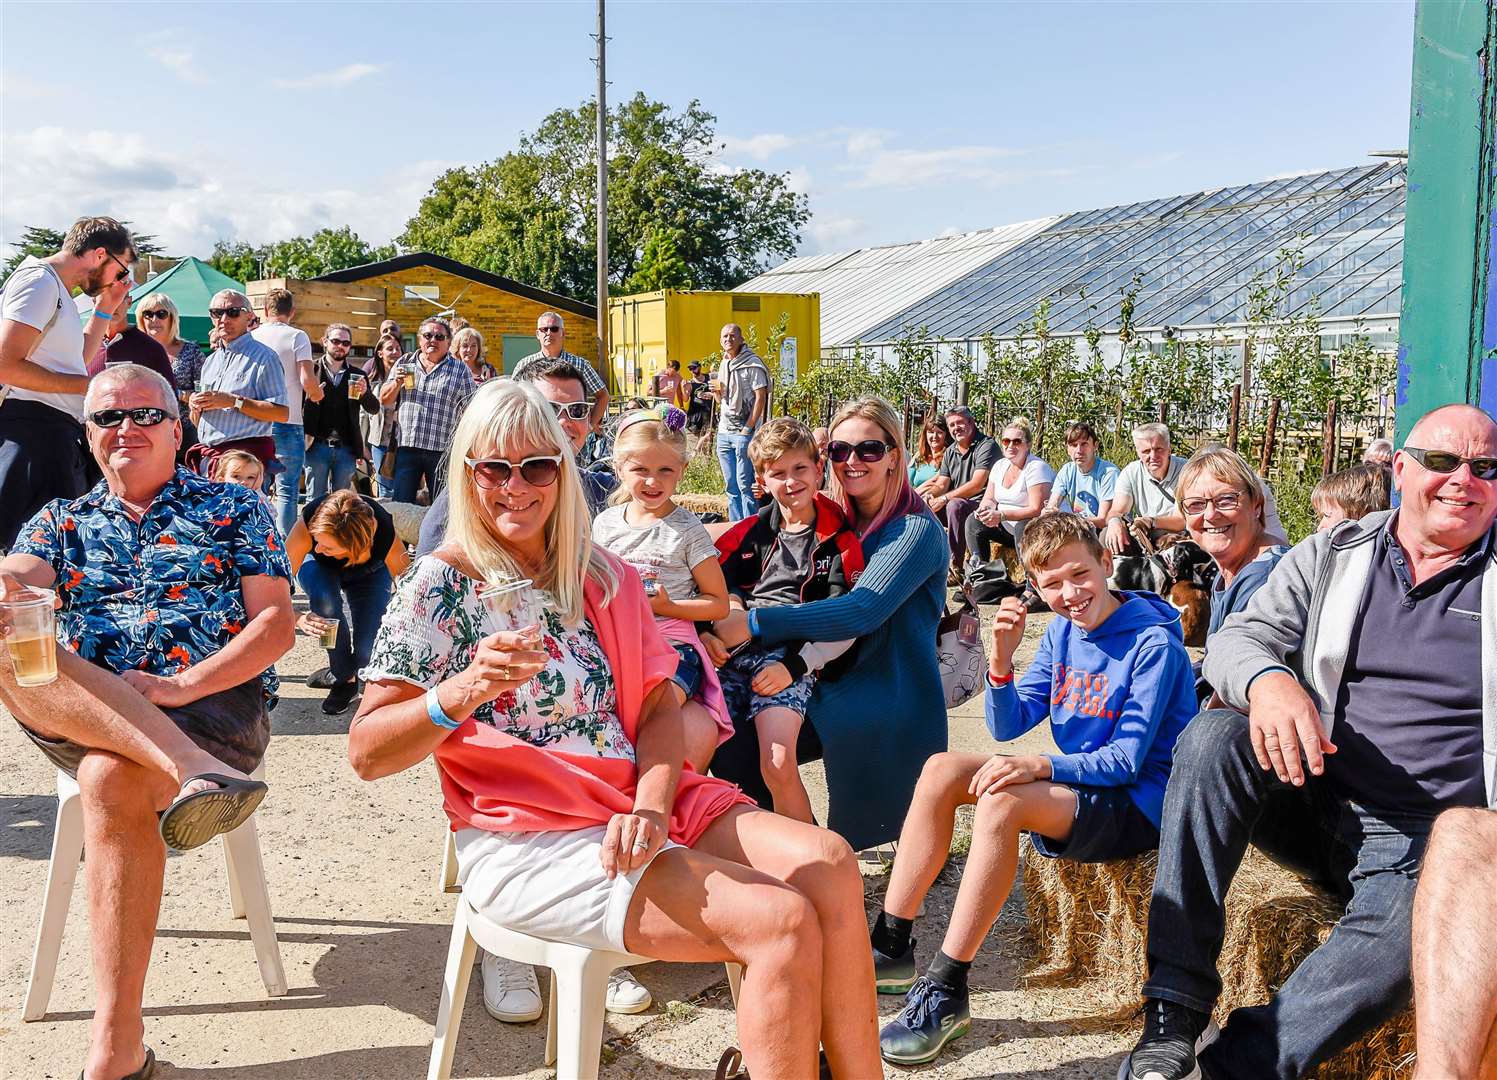 Brogdale Cider Festival attracts large crowds – many of whom travel by train